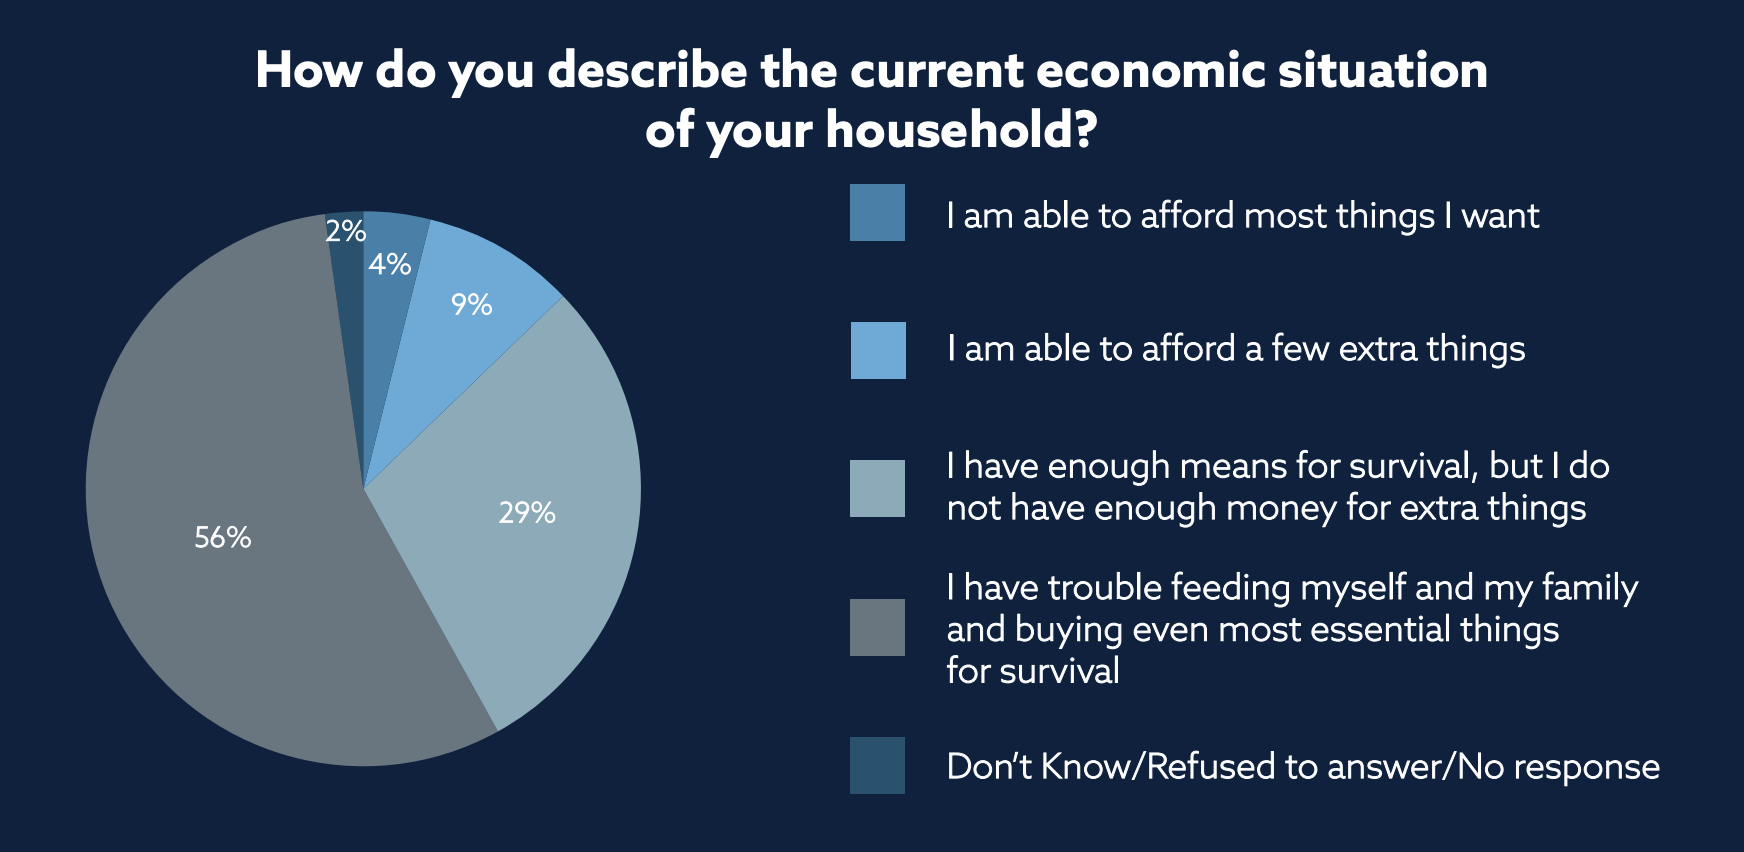 How do you describe the current economic situation of your household? A pie chart showing: I am able to afford most things I want 4%; I am able to afford a few extra things 9%; I have enough means for survival, but I do not have enough money for extra things 29%; I have trouble feeding myself and my family and buying even the most essential things for survival 56%; don't know/refused to answer/no response 2%.